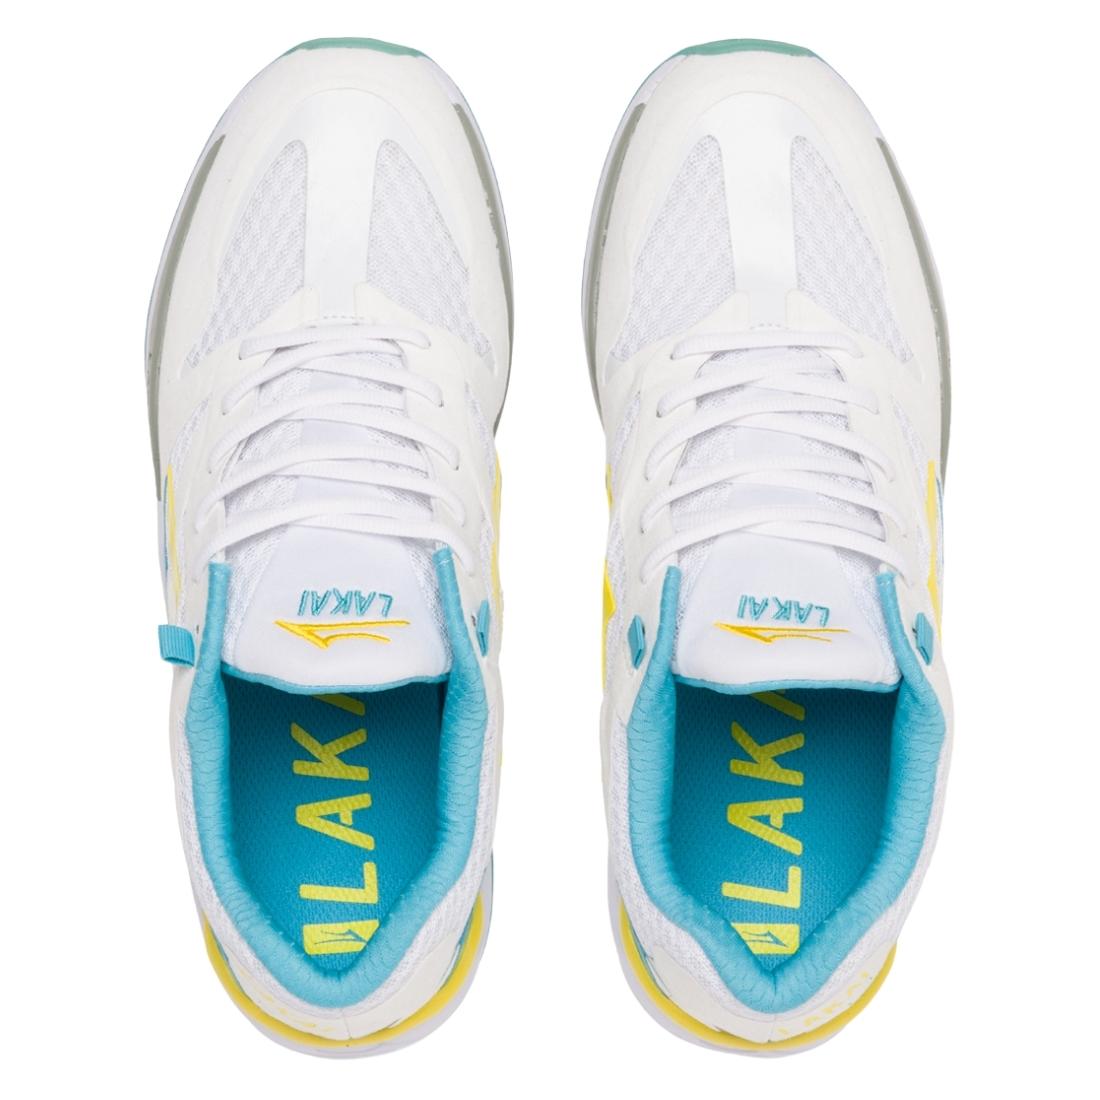 Lakai Evo 2.0 Shoes - White/Teal Suede - Mens Running Shoes/Trainers by Lakai